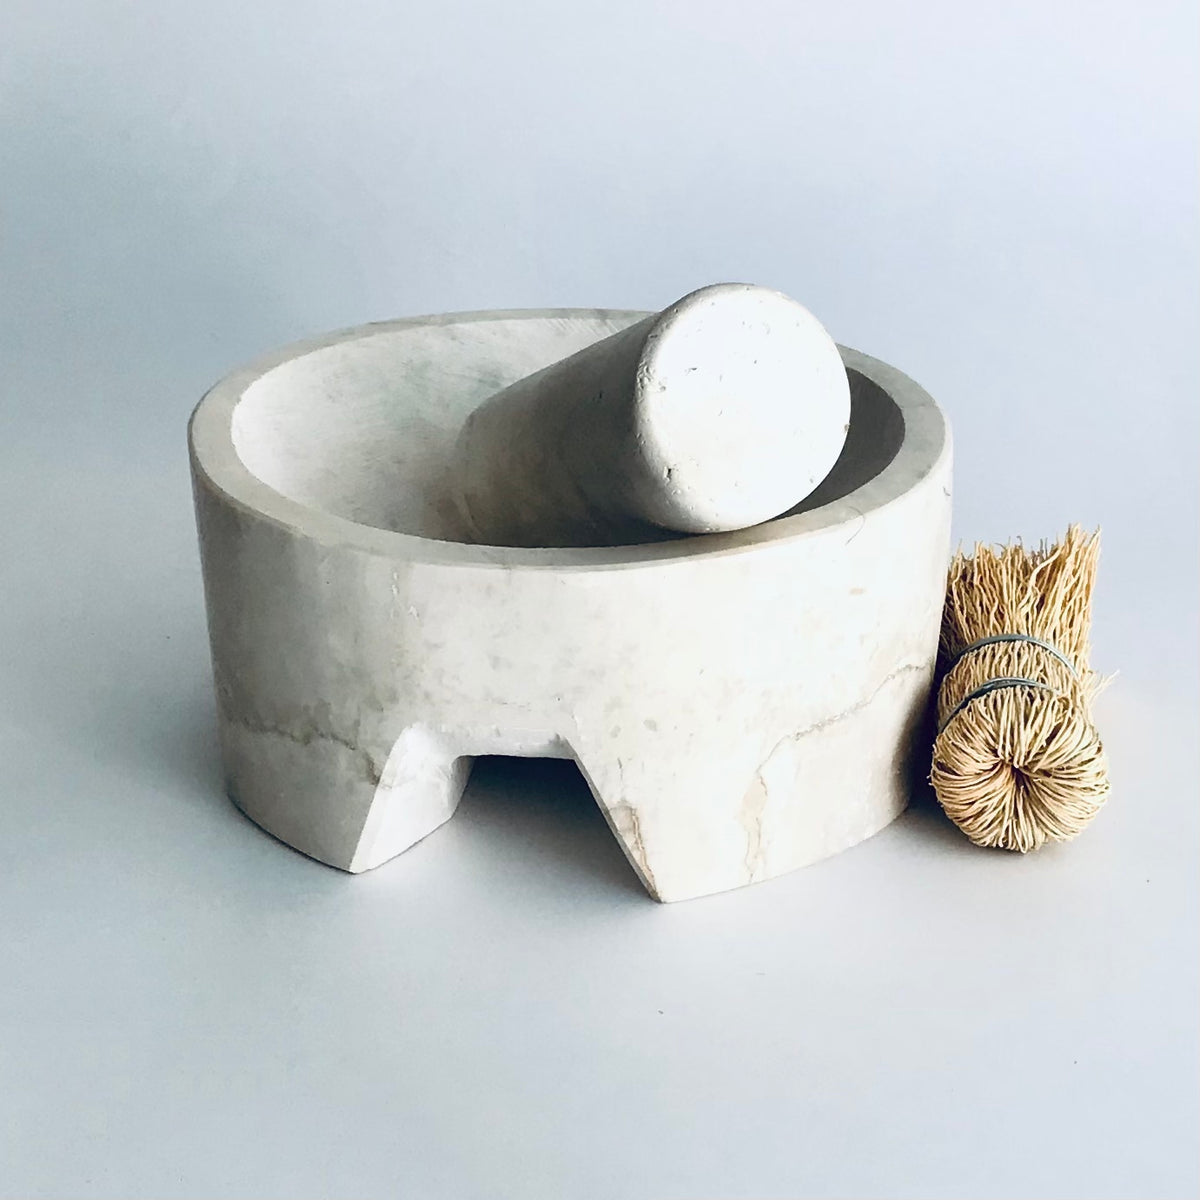 Authentic Mexican Volcanic Stone Mortar and Pestle | Charming Tiny Animal  Molcajete (2 Diameter)